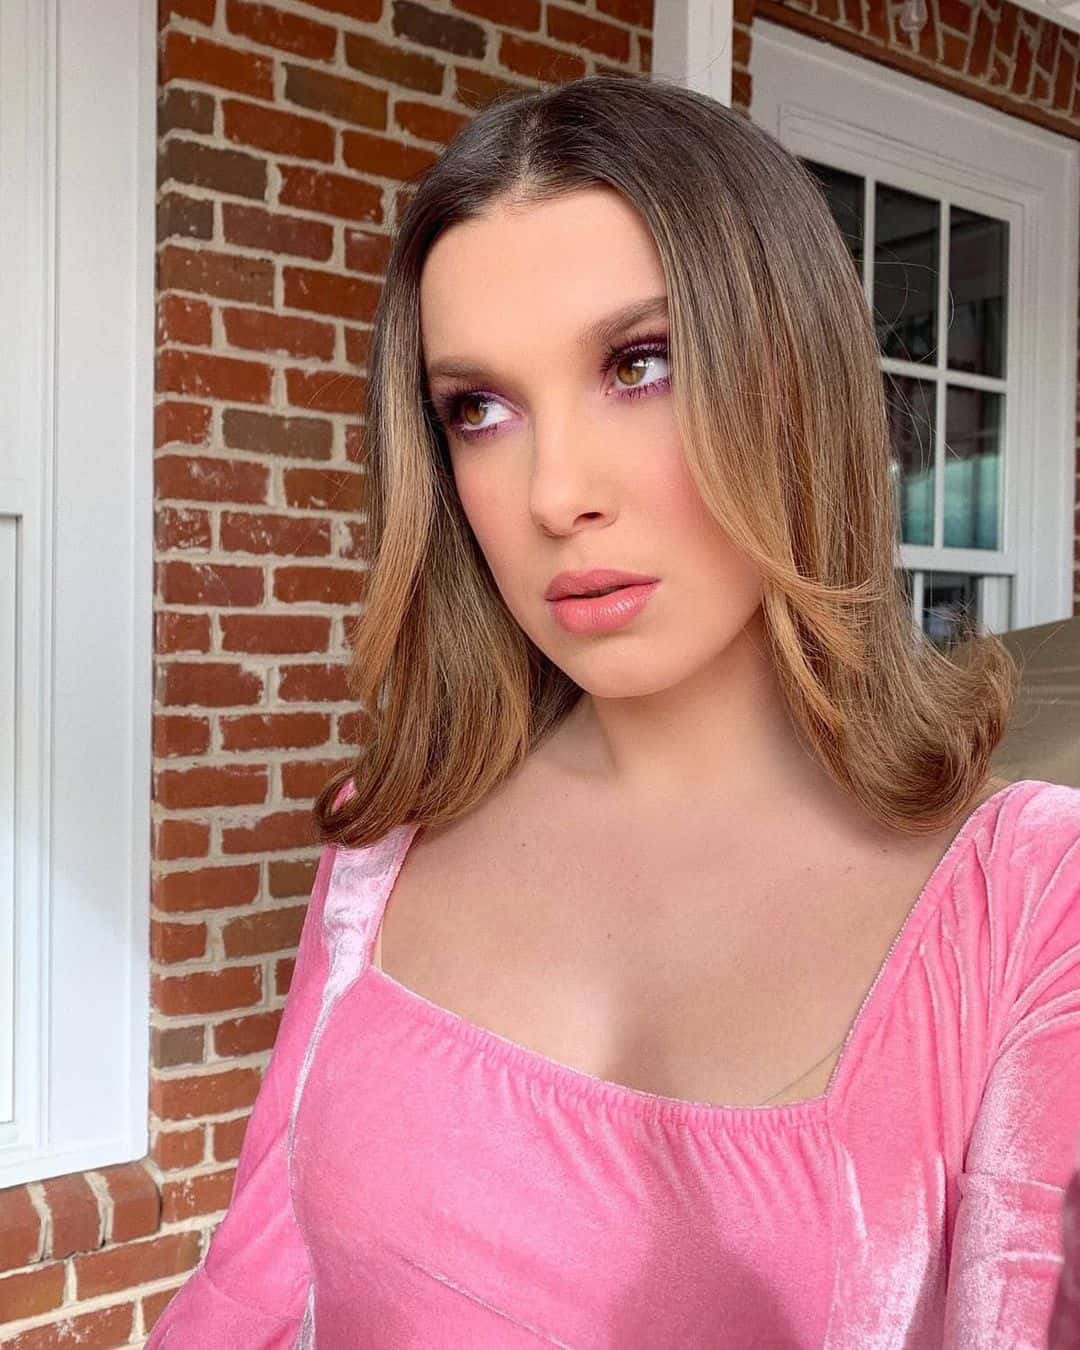 Millie Bobby Brown Turns 17 Today. CEN